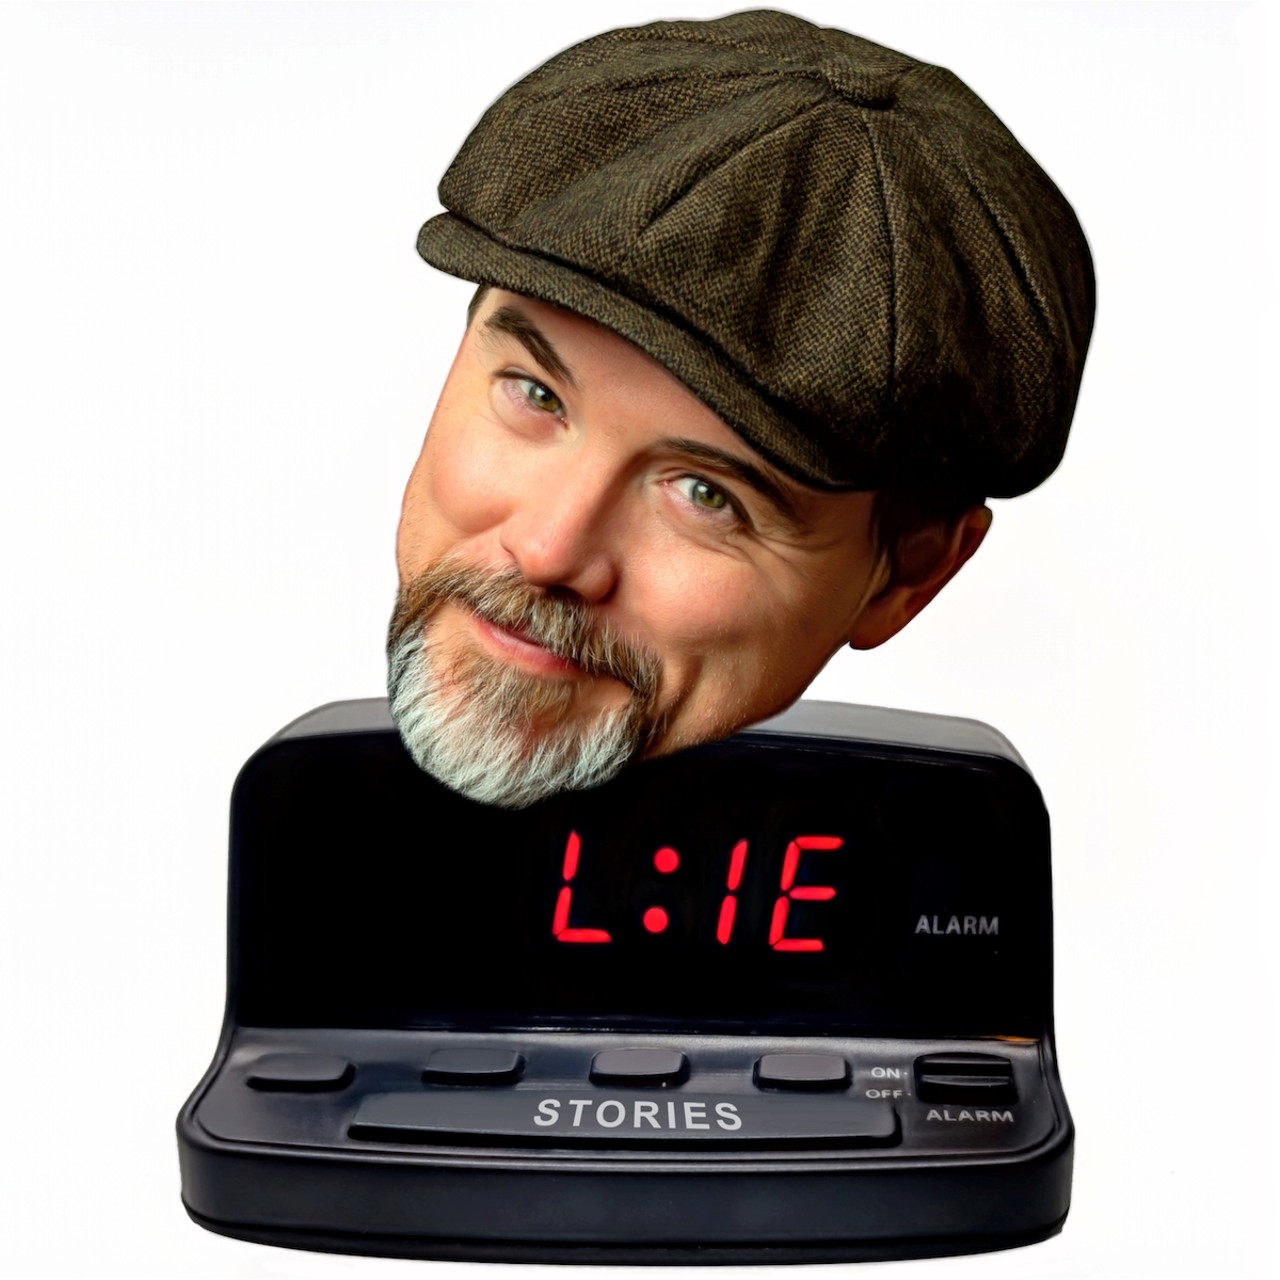 1nce Upon a Lie
For a decade Paul Strickland, who lives in Covington, has been a favorite at Fringe Festivals across the U.S. and Canada. The award-winning storyteller will again conjure up “Ain’t True & Uncle False” and the denizens of the Big Fib Trailer Park cul-de-sac, plus a bit of his own storytelling and songs that are both hilarious and heartfelt. Strickland has developed a national reputation, and he’s joined the big leagues of storytelling with a gig at the National Storytelling Festival in Jonesborough, Tennessee, Oct. 6-8.